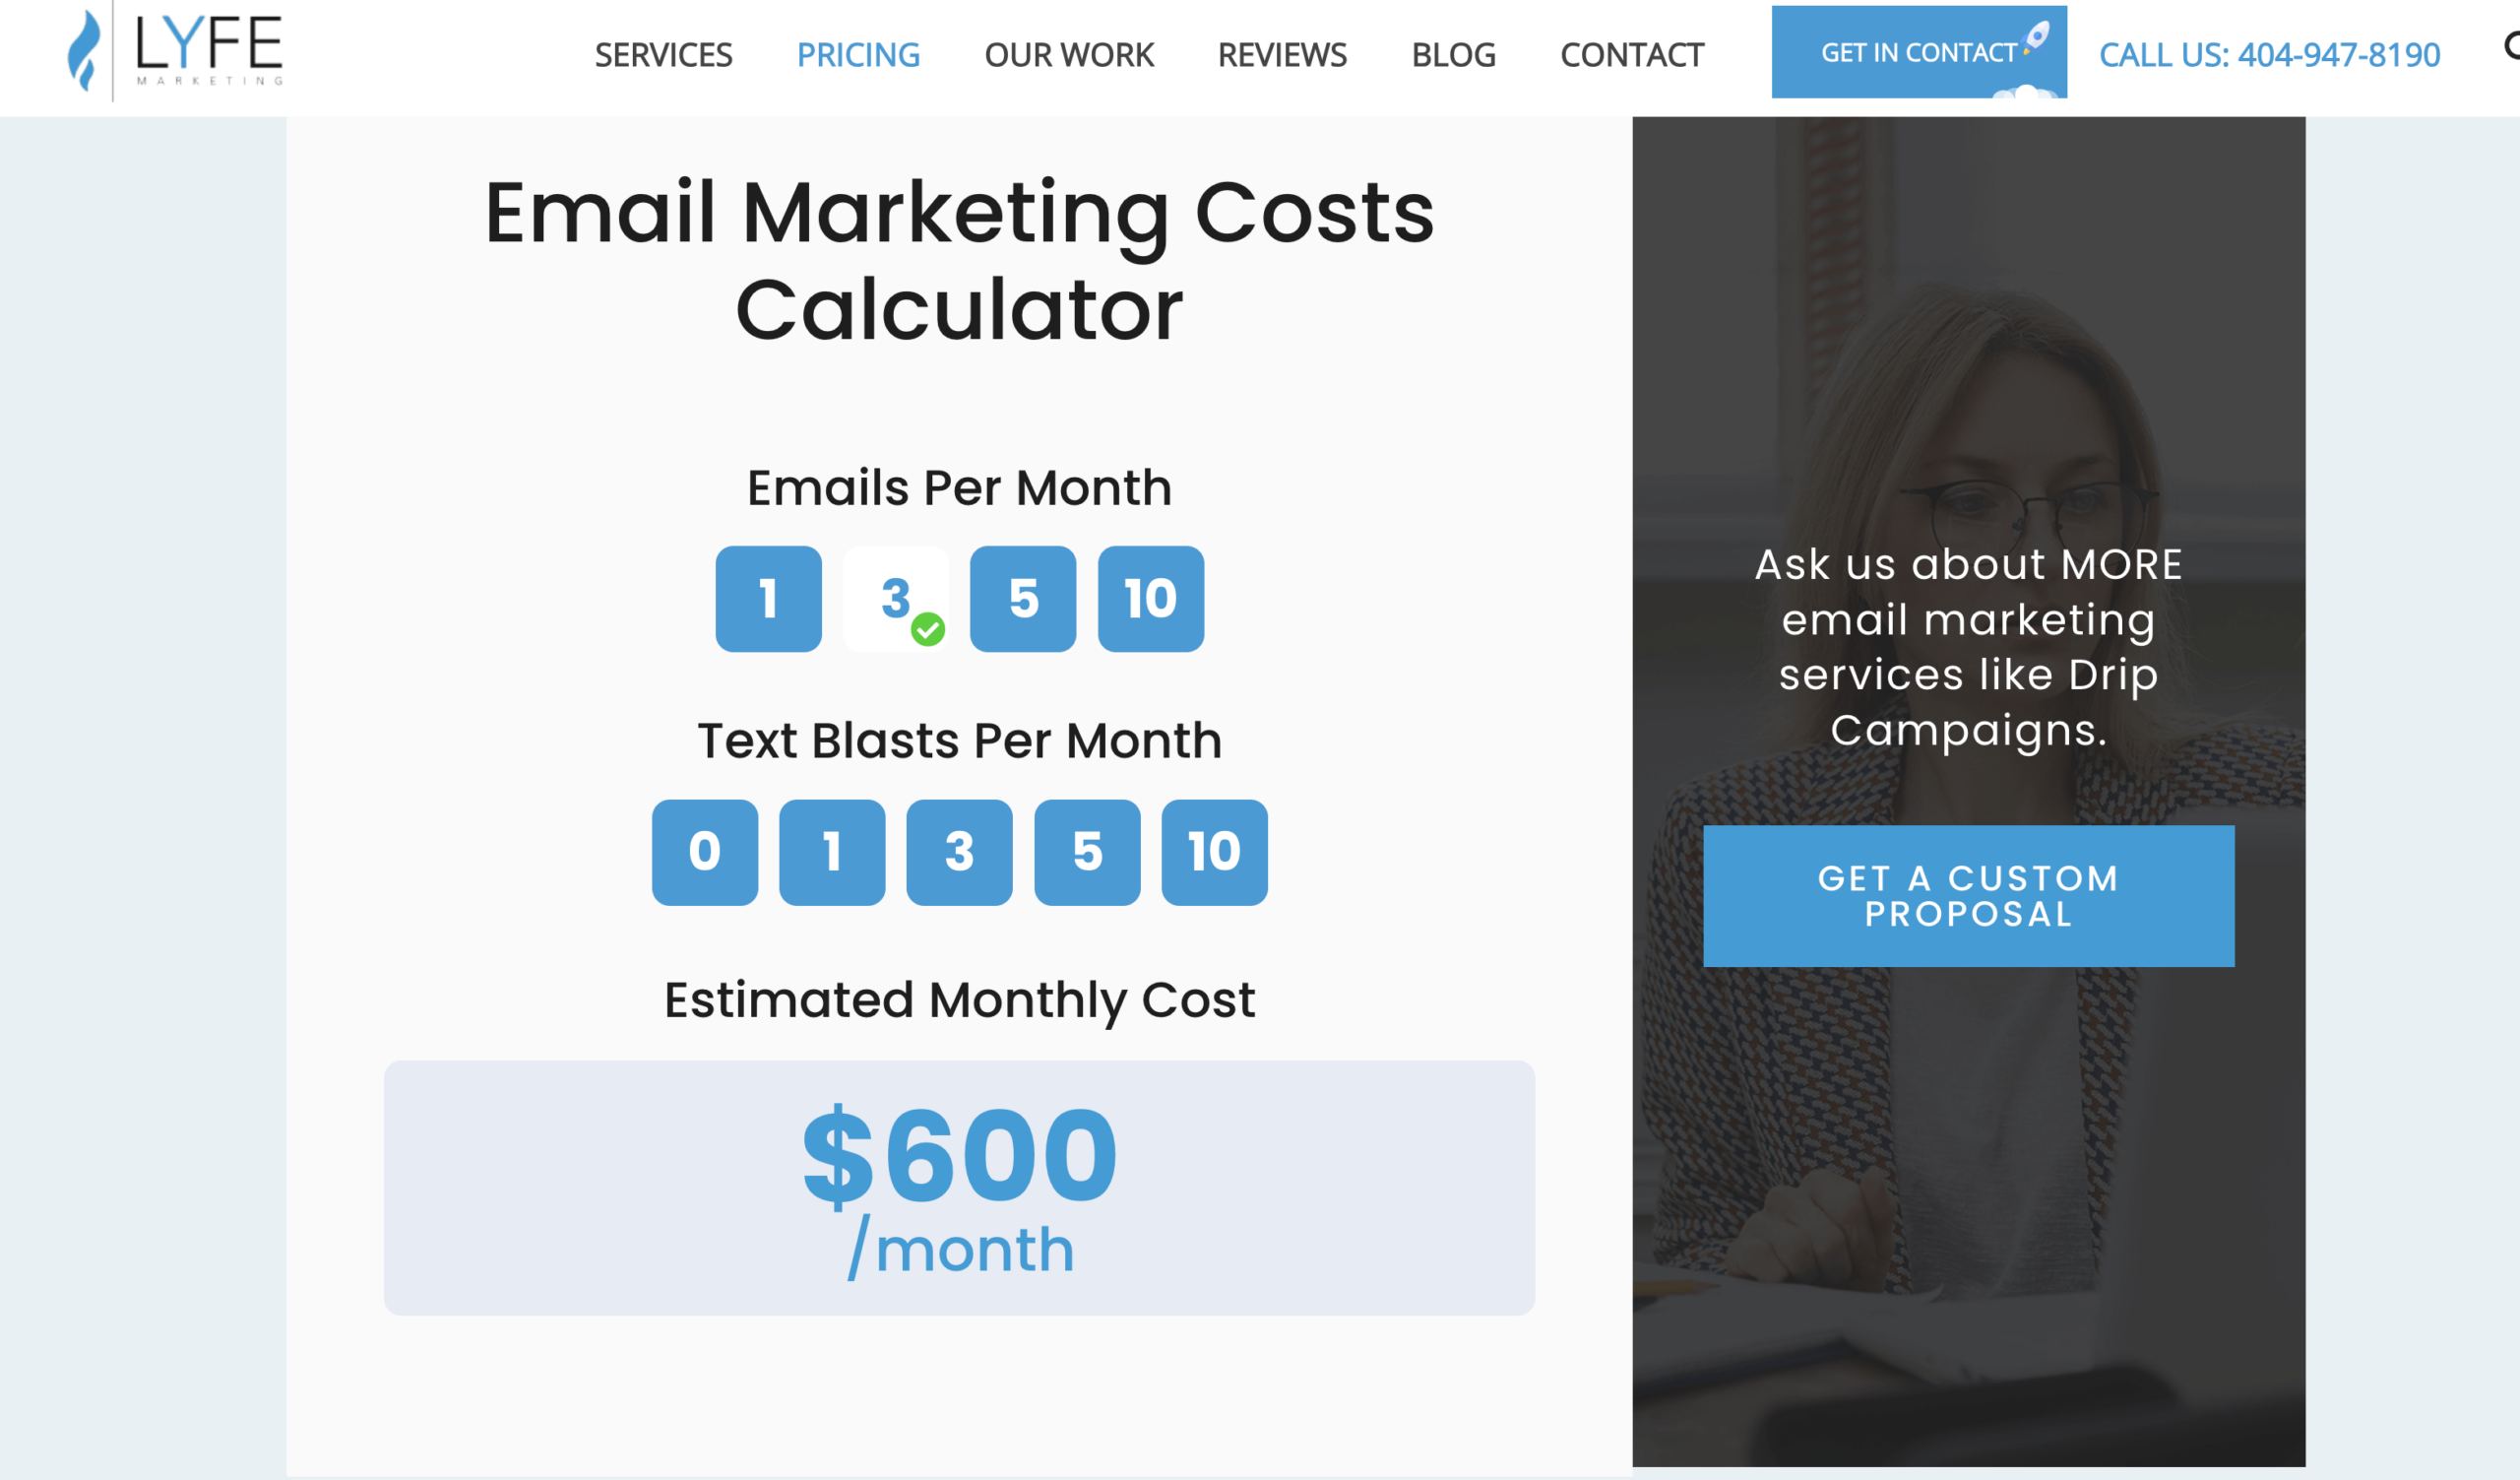 Save money by using LYFE Marketing's email marketing costs calculator.